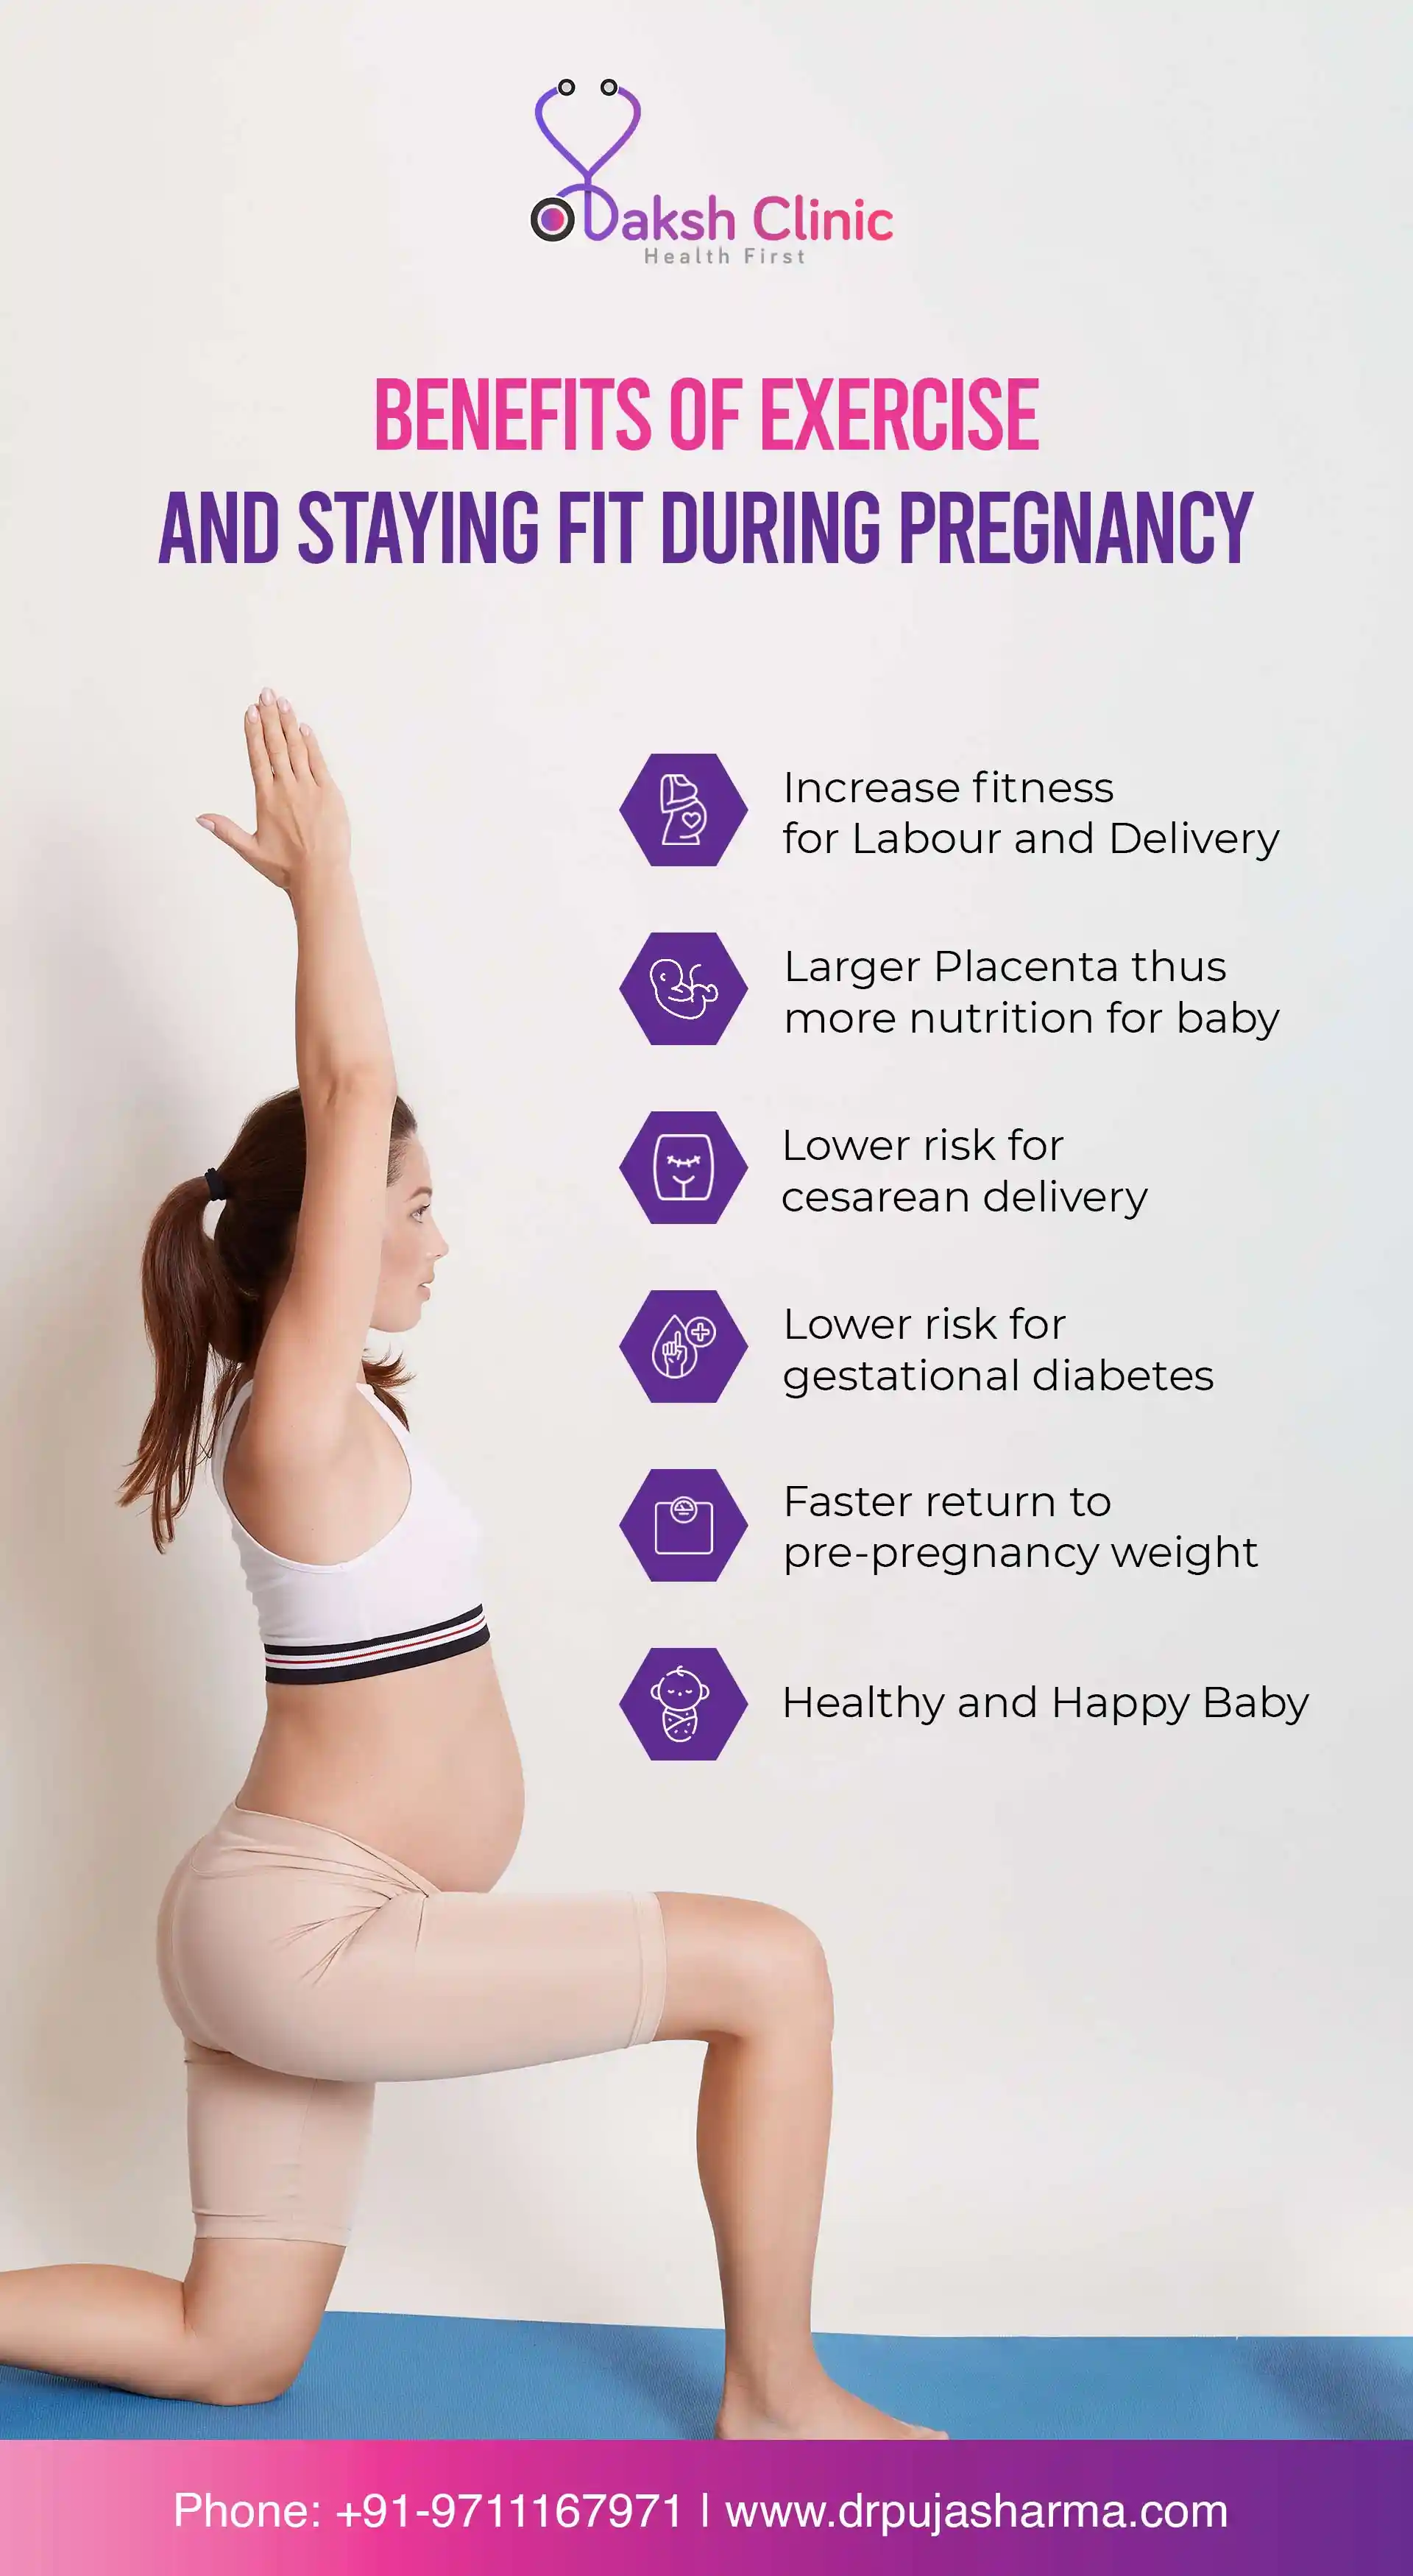 Stay Fit During Your Pregnancy